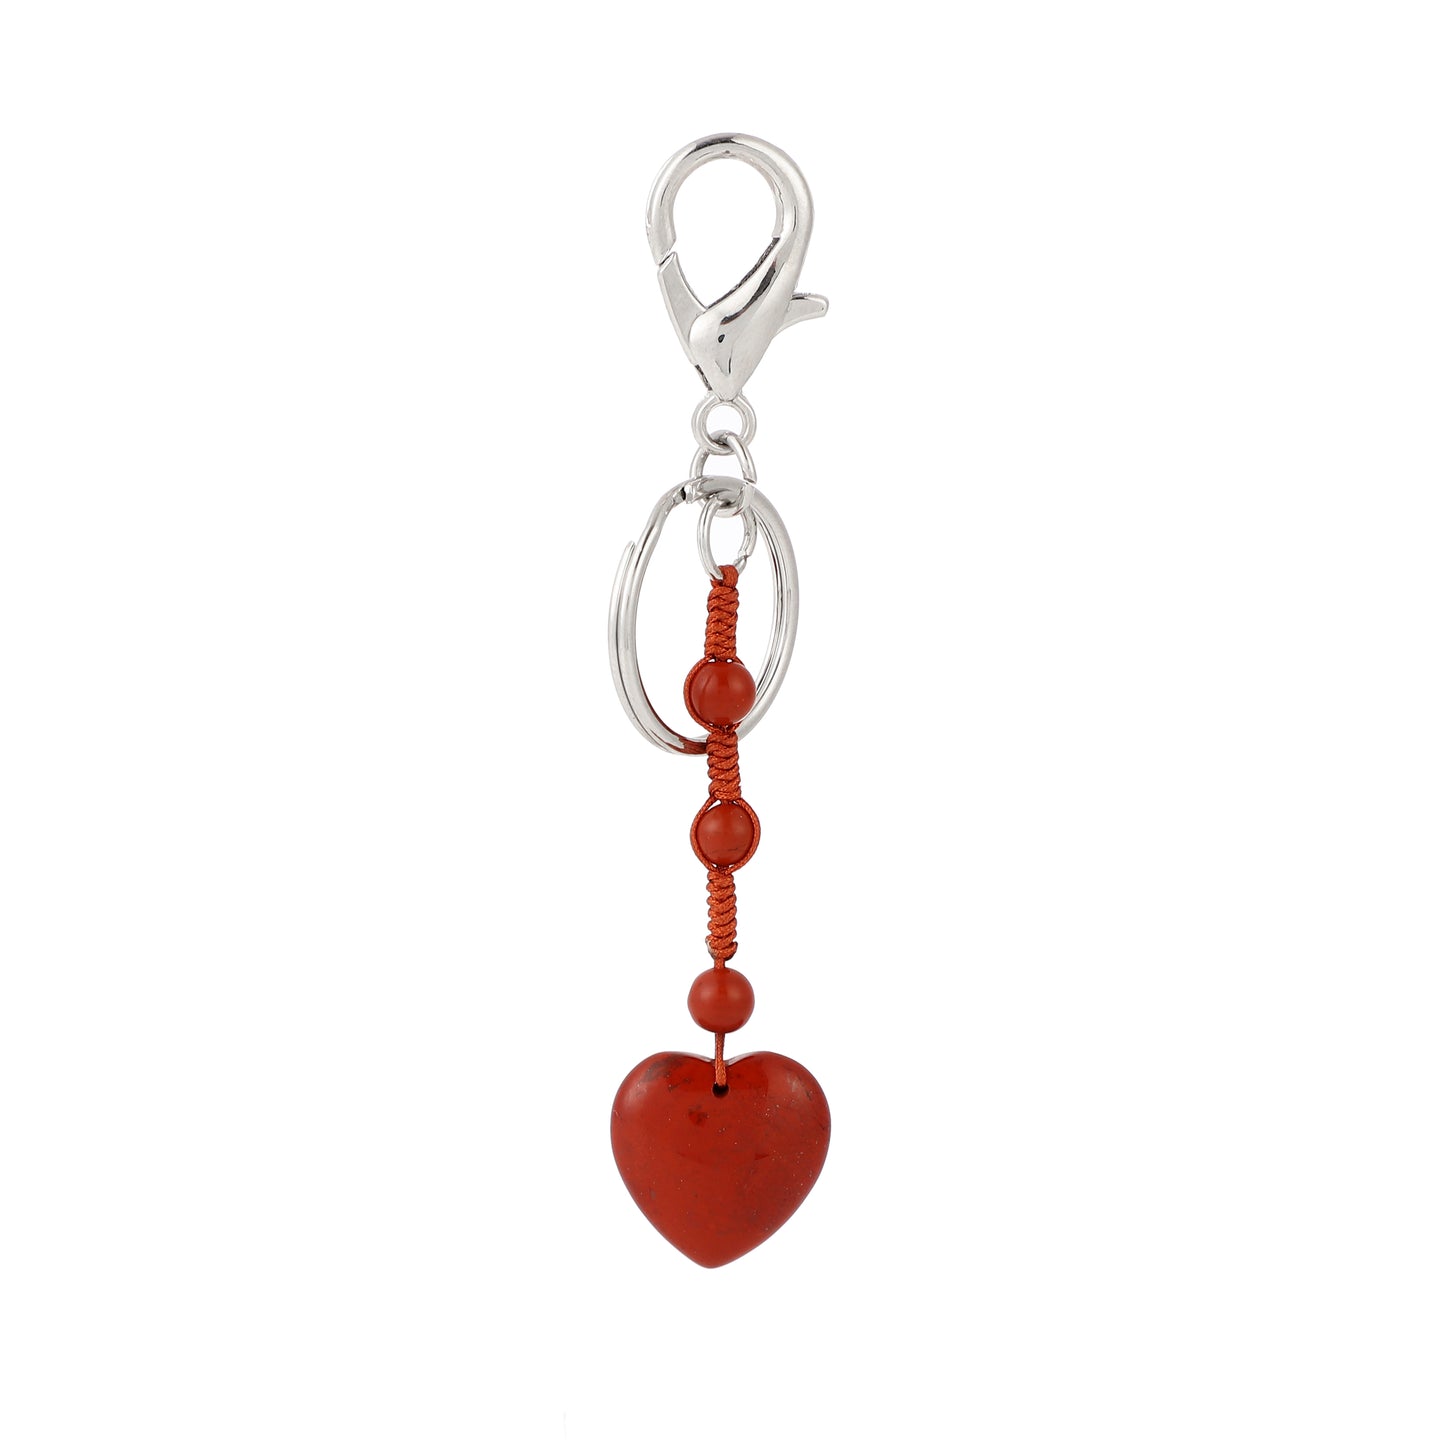 Exquisite 20-Heart Key Chain - Carry Love and Style Everywhere